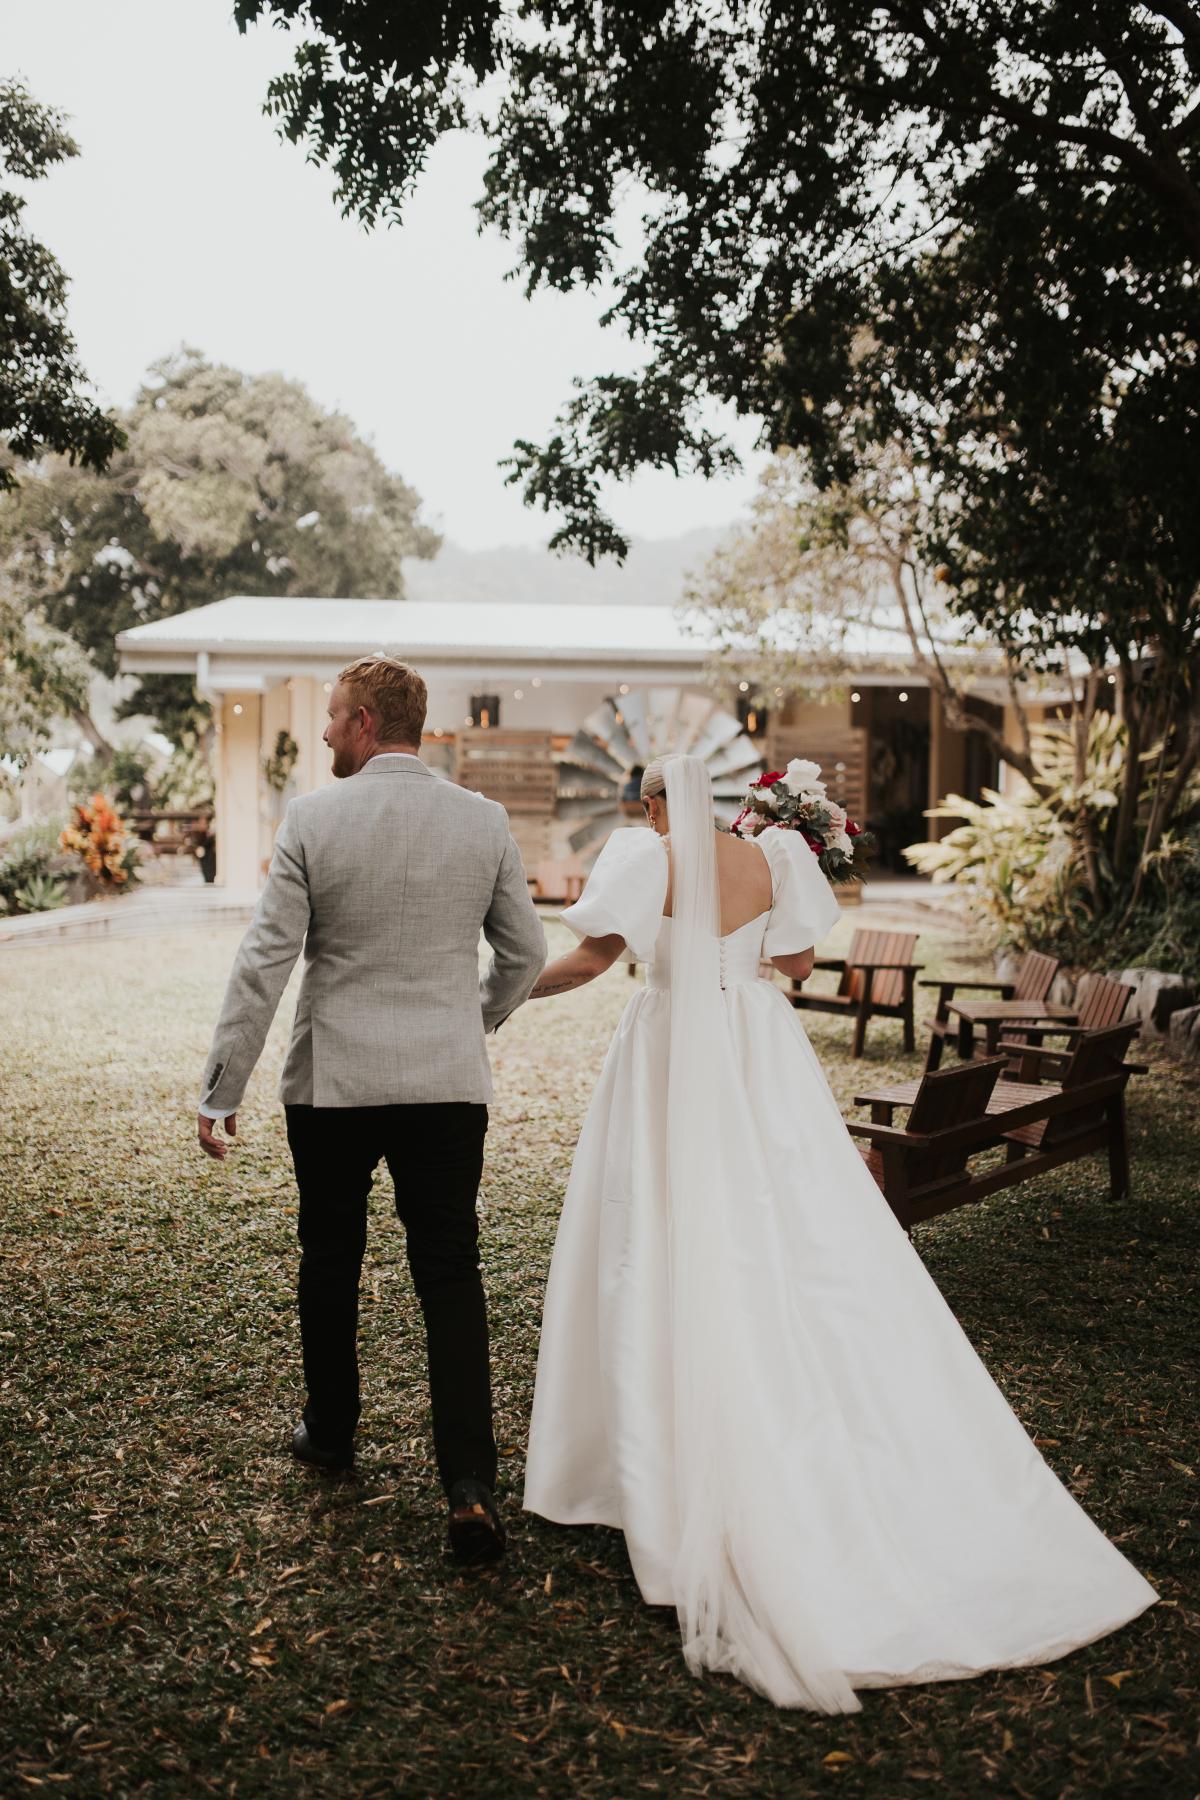 Bride wears Blake & Camille wedding dress by Karen Willis Holmes, an elegant ballgown with corseted bust cups, a full skirt with pockets and feminine bubble sleeves.